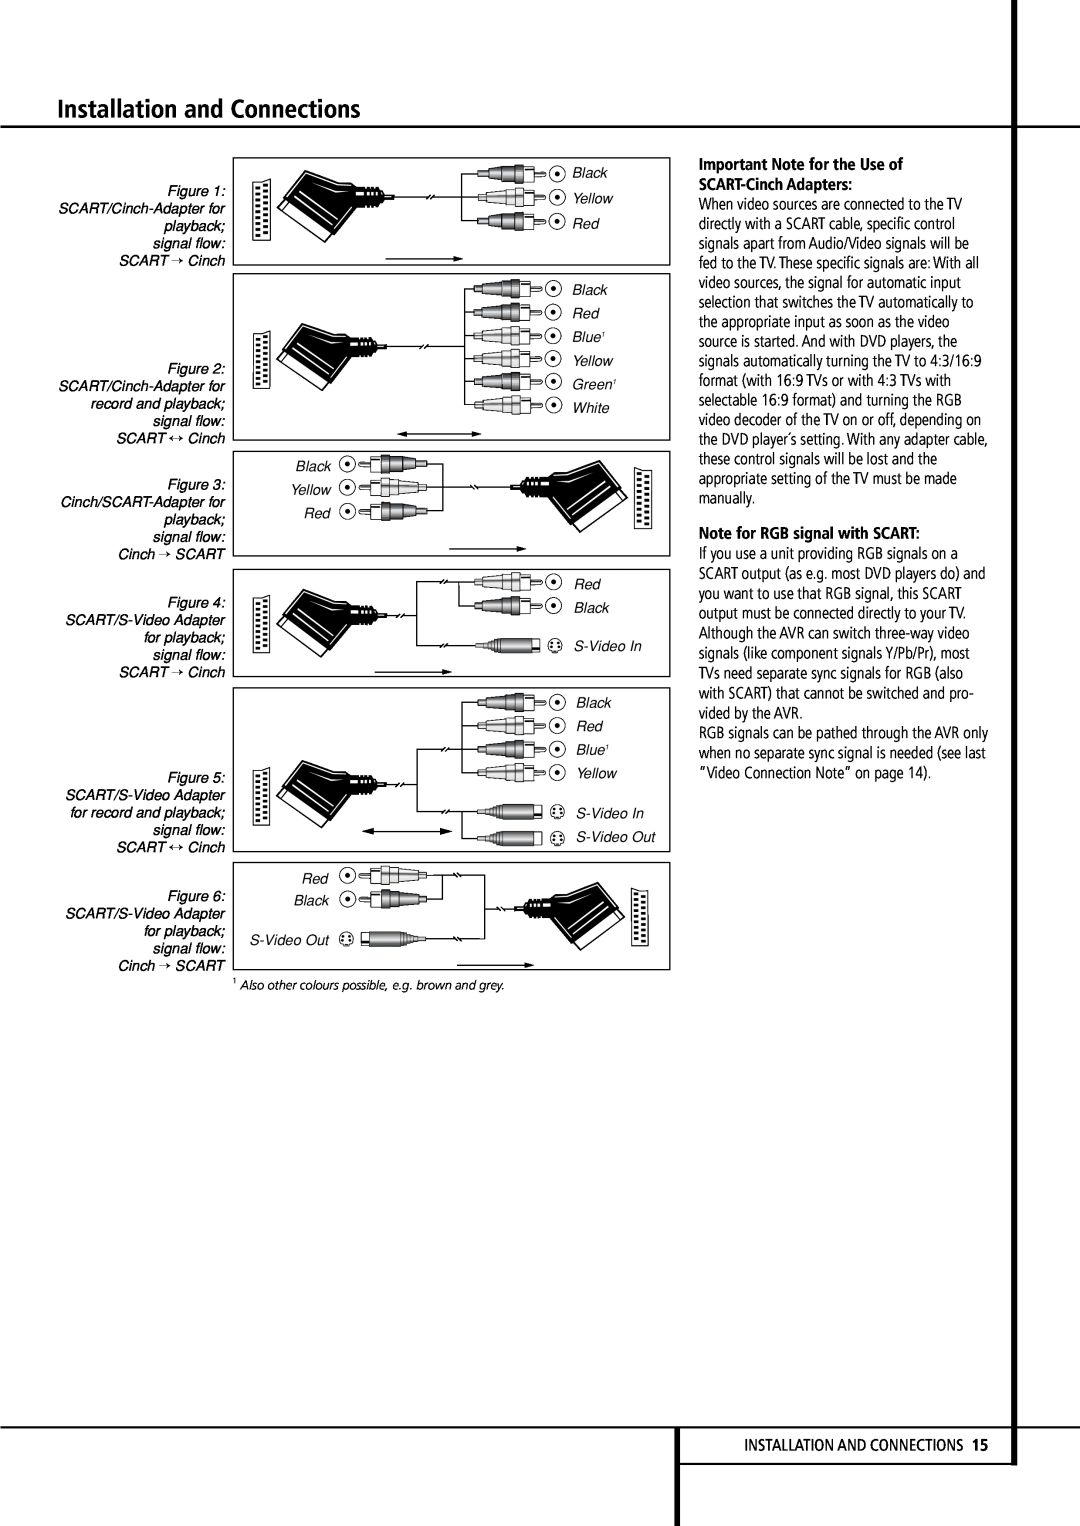 Harman-Kardon AVR507 owner manual Important Note for the Use of SCART-CinchAdapters, Note for RGB signal with SCART 